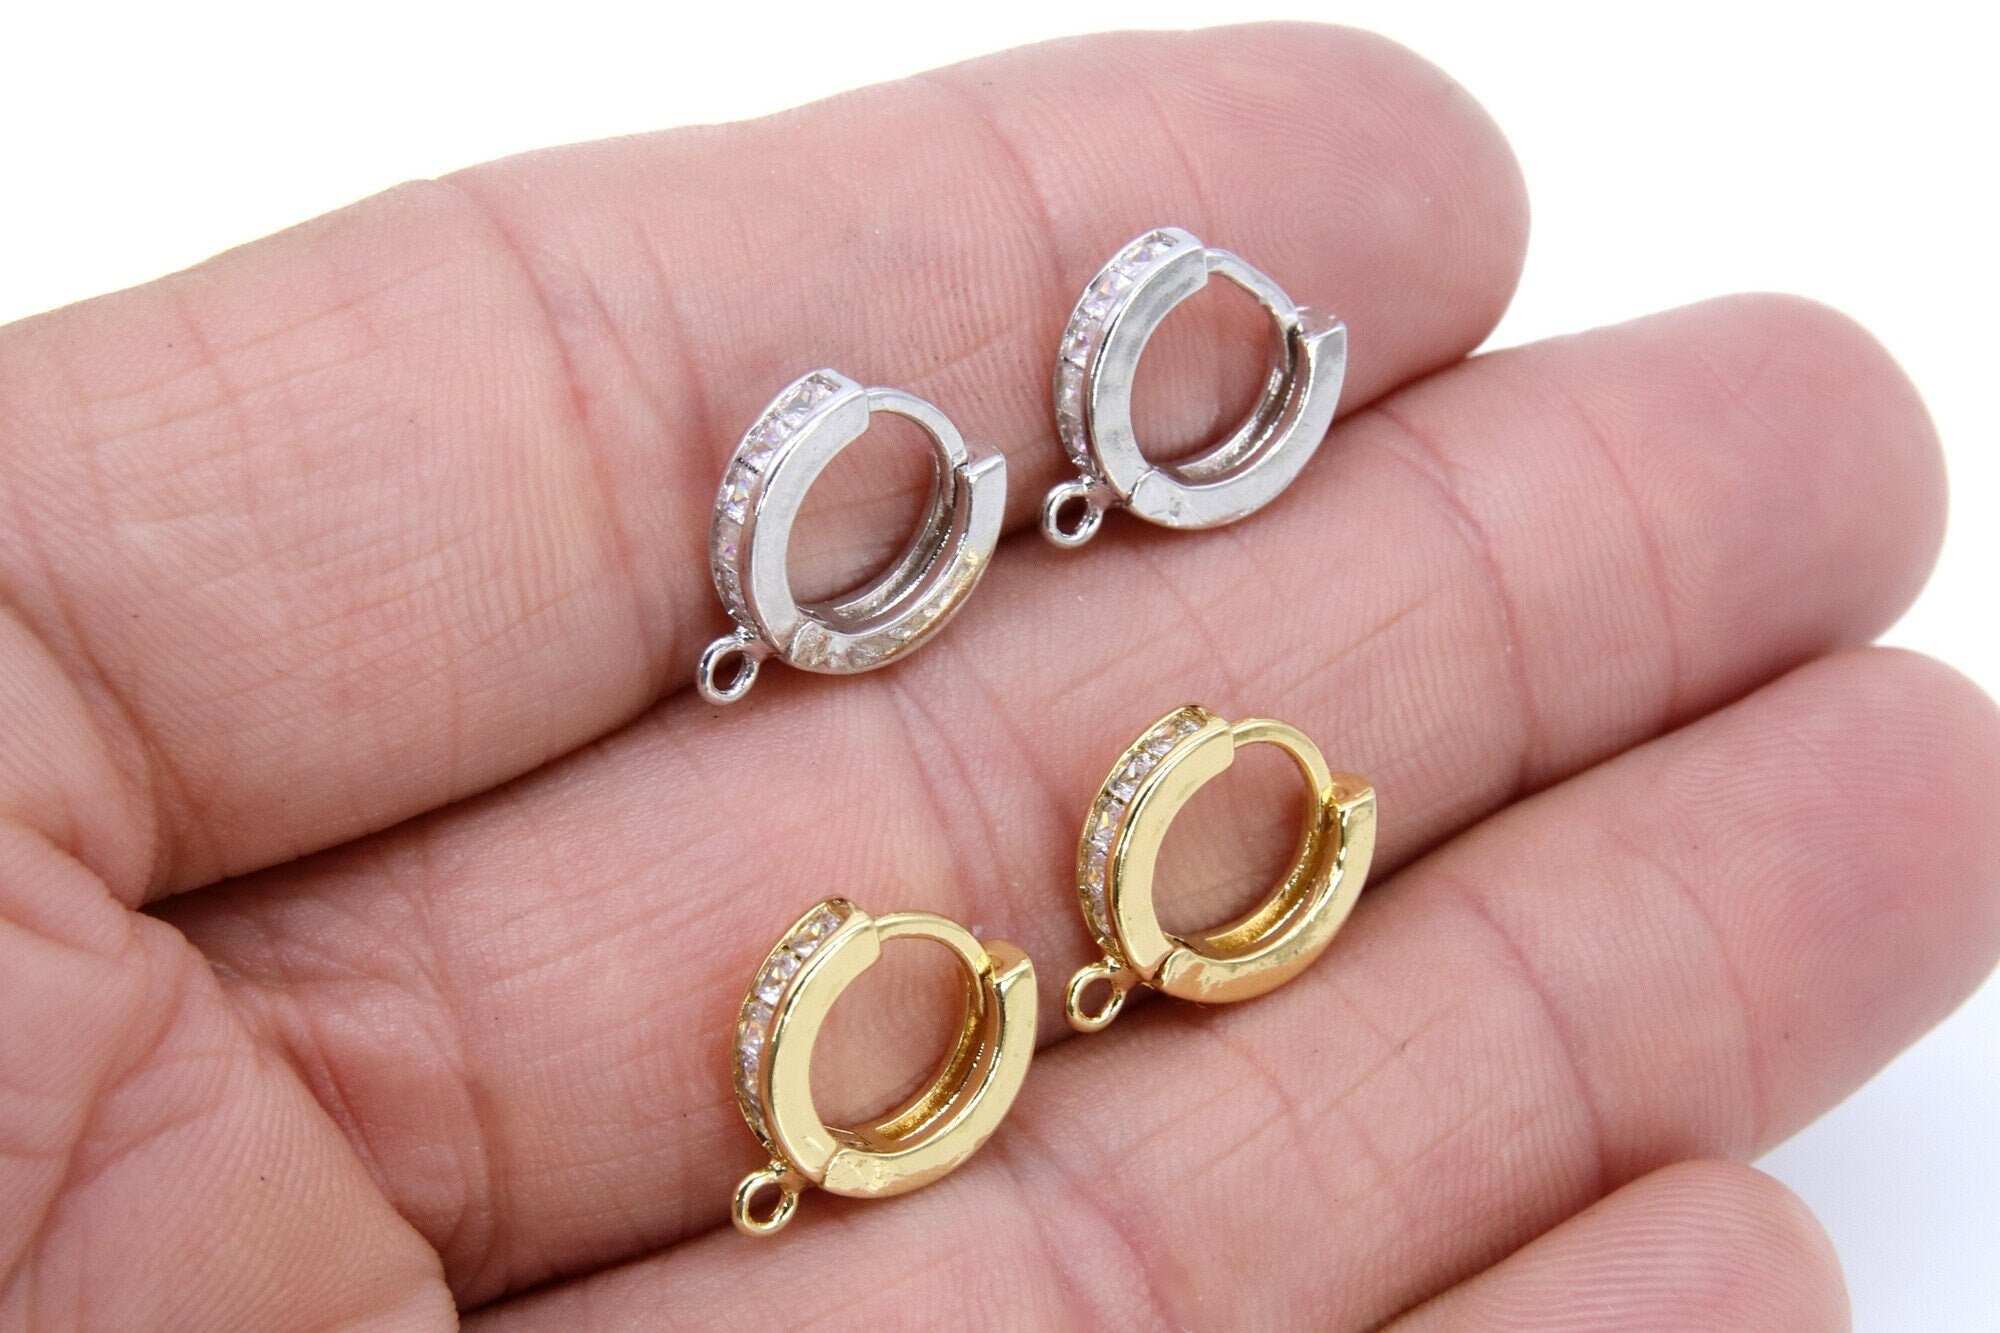 CZ Micro Pave Silver Huggies, Thick 3.5 mm Lever back Gold Round Ear Ring Parts #732, 14 mm Hoops with Closed / Open Loops